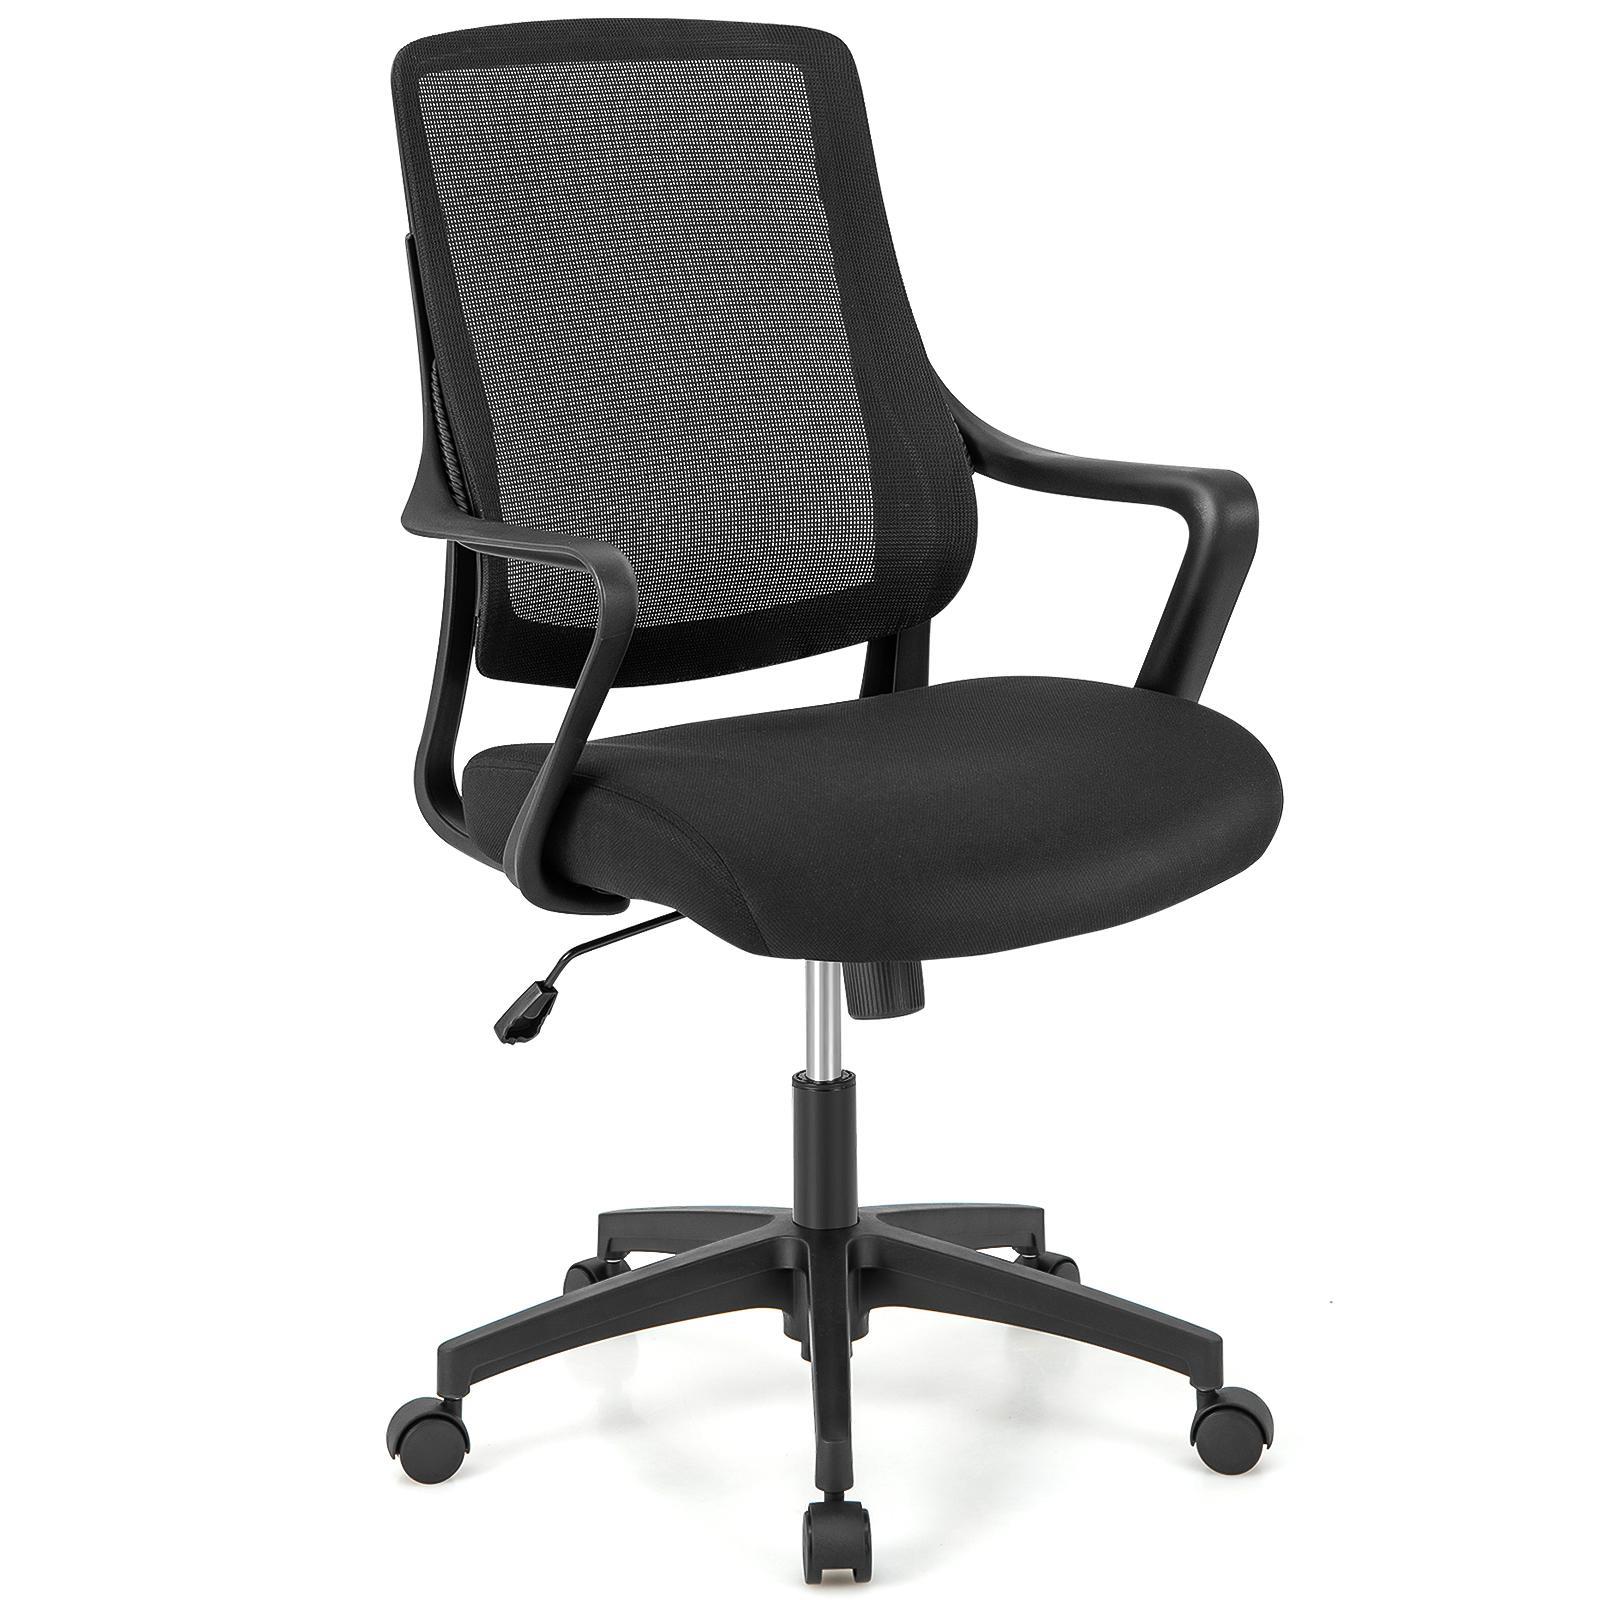 Giantex Ergonomic Mesh Office Chair Height Adjustable Gaming Chair Computer Chair Executive Mid Back, Black